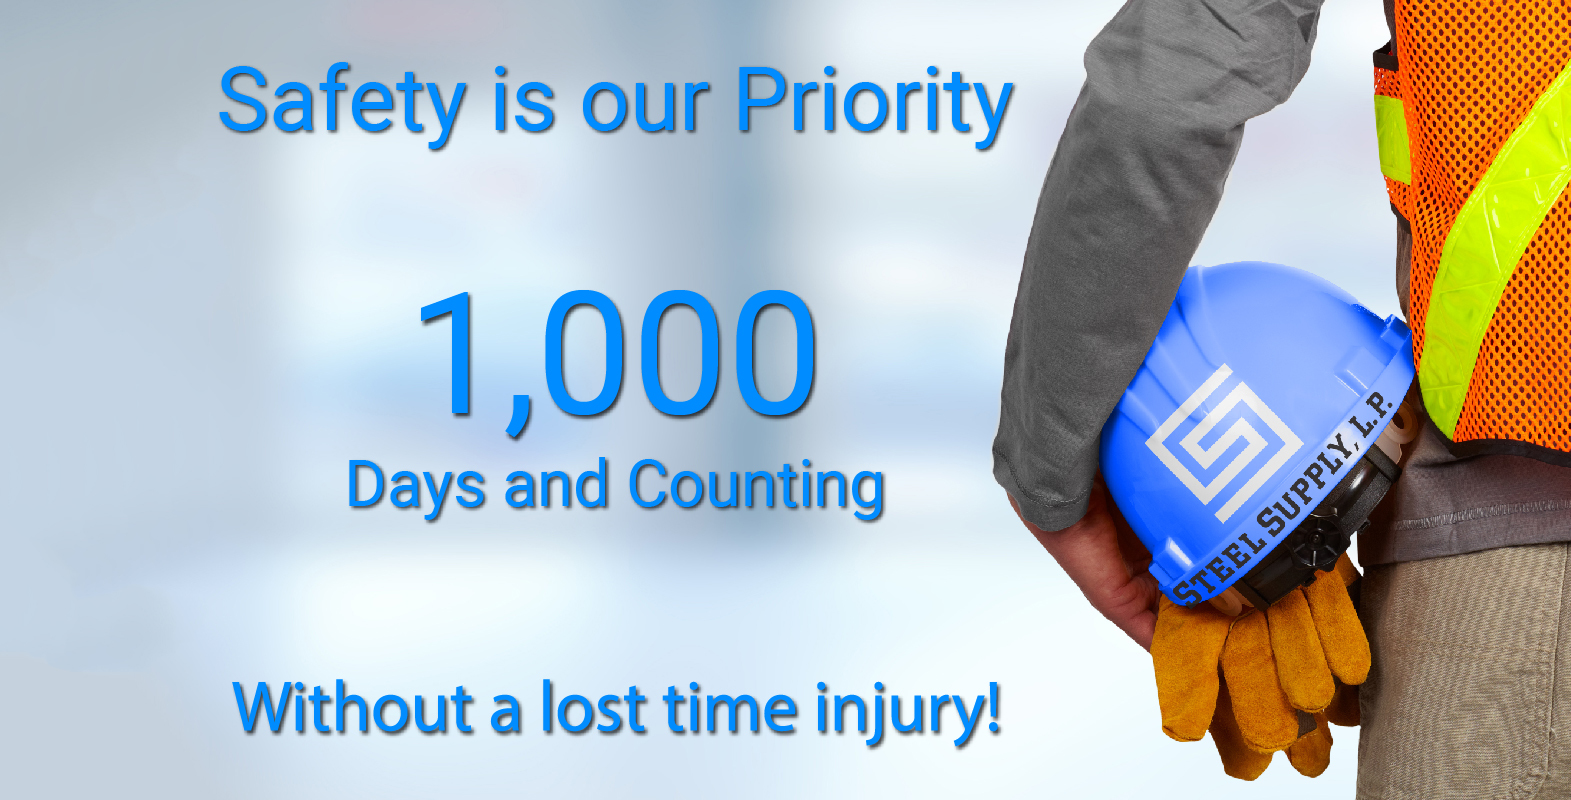 Safety priority banner